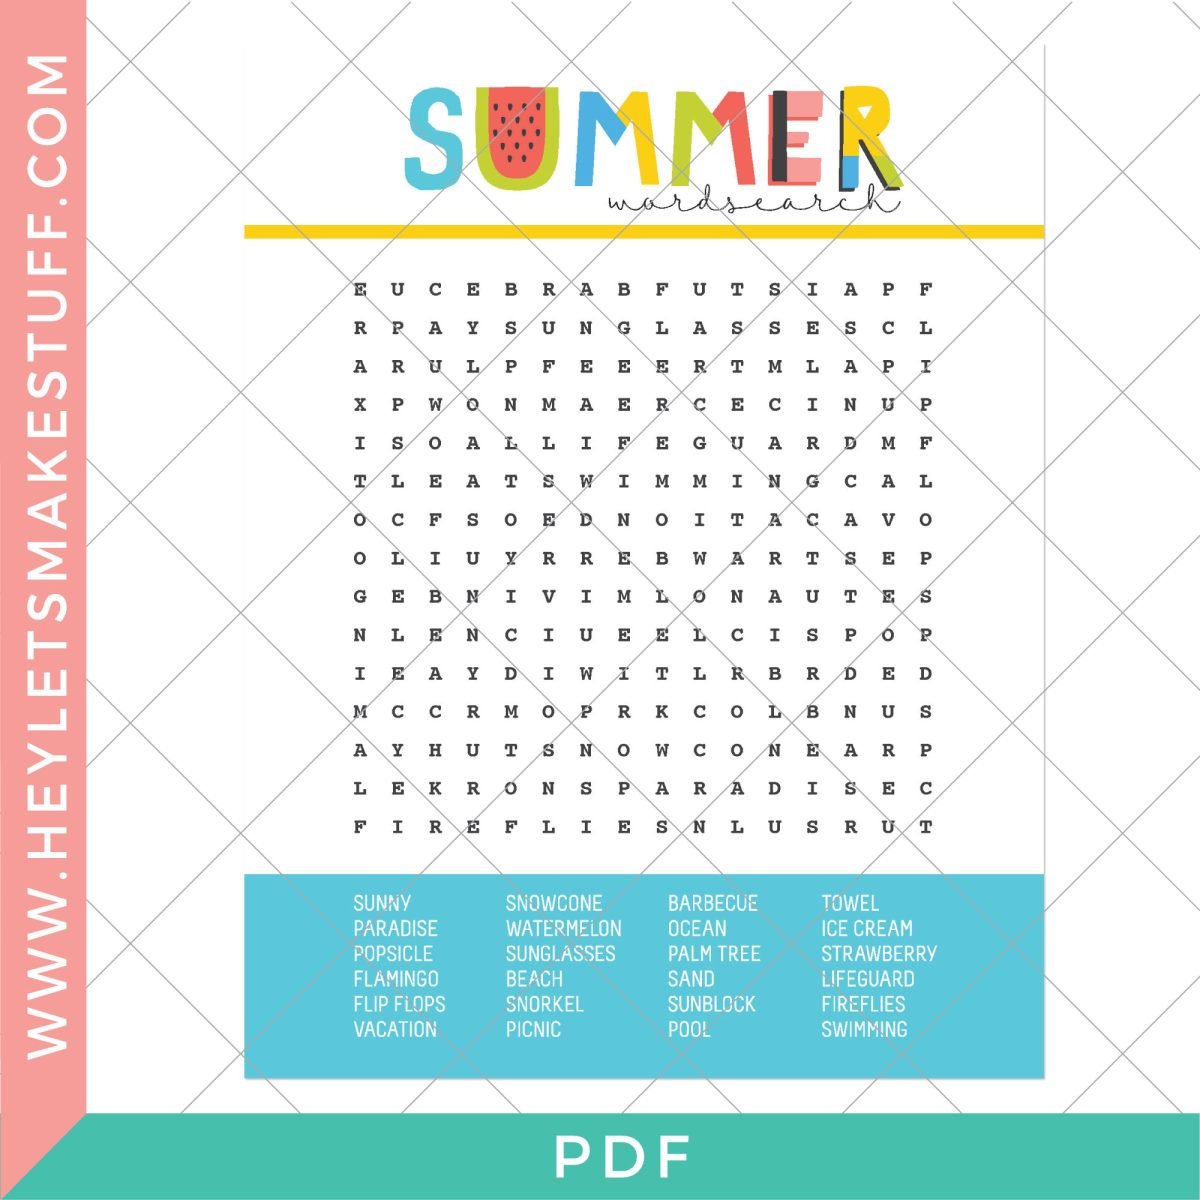 Summer Word Search security image.